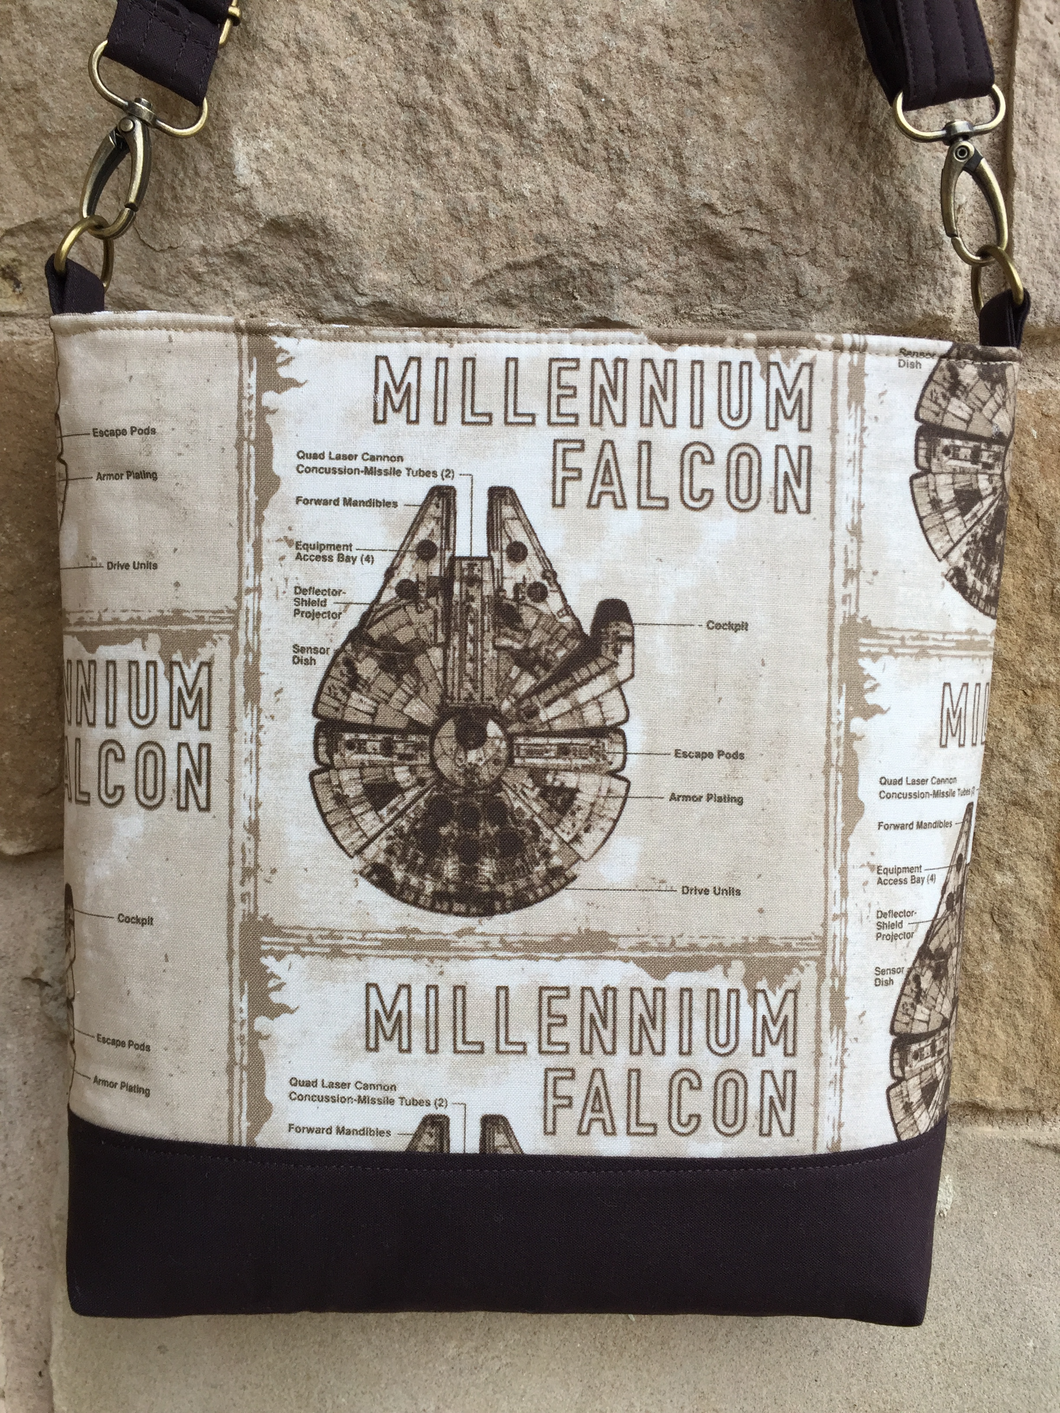 Messenger Bag Made With Licensed Rebel Spaceship Fabric - Adjustable Strap - Zippered Closure - Zippered Pocket - Cross Body Bag